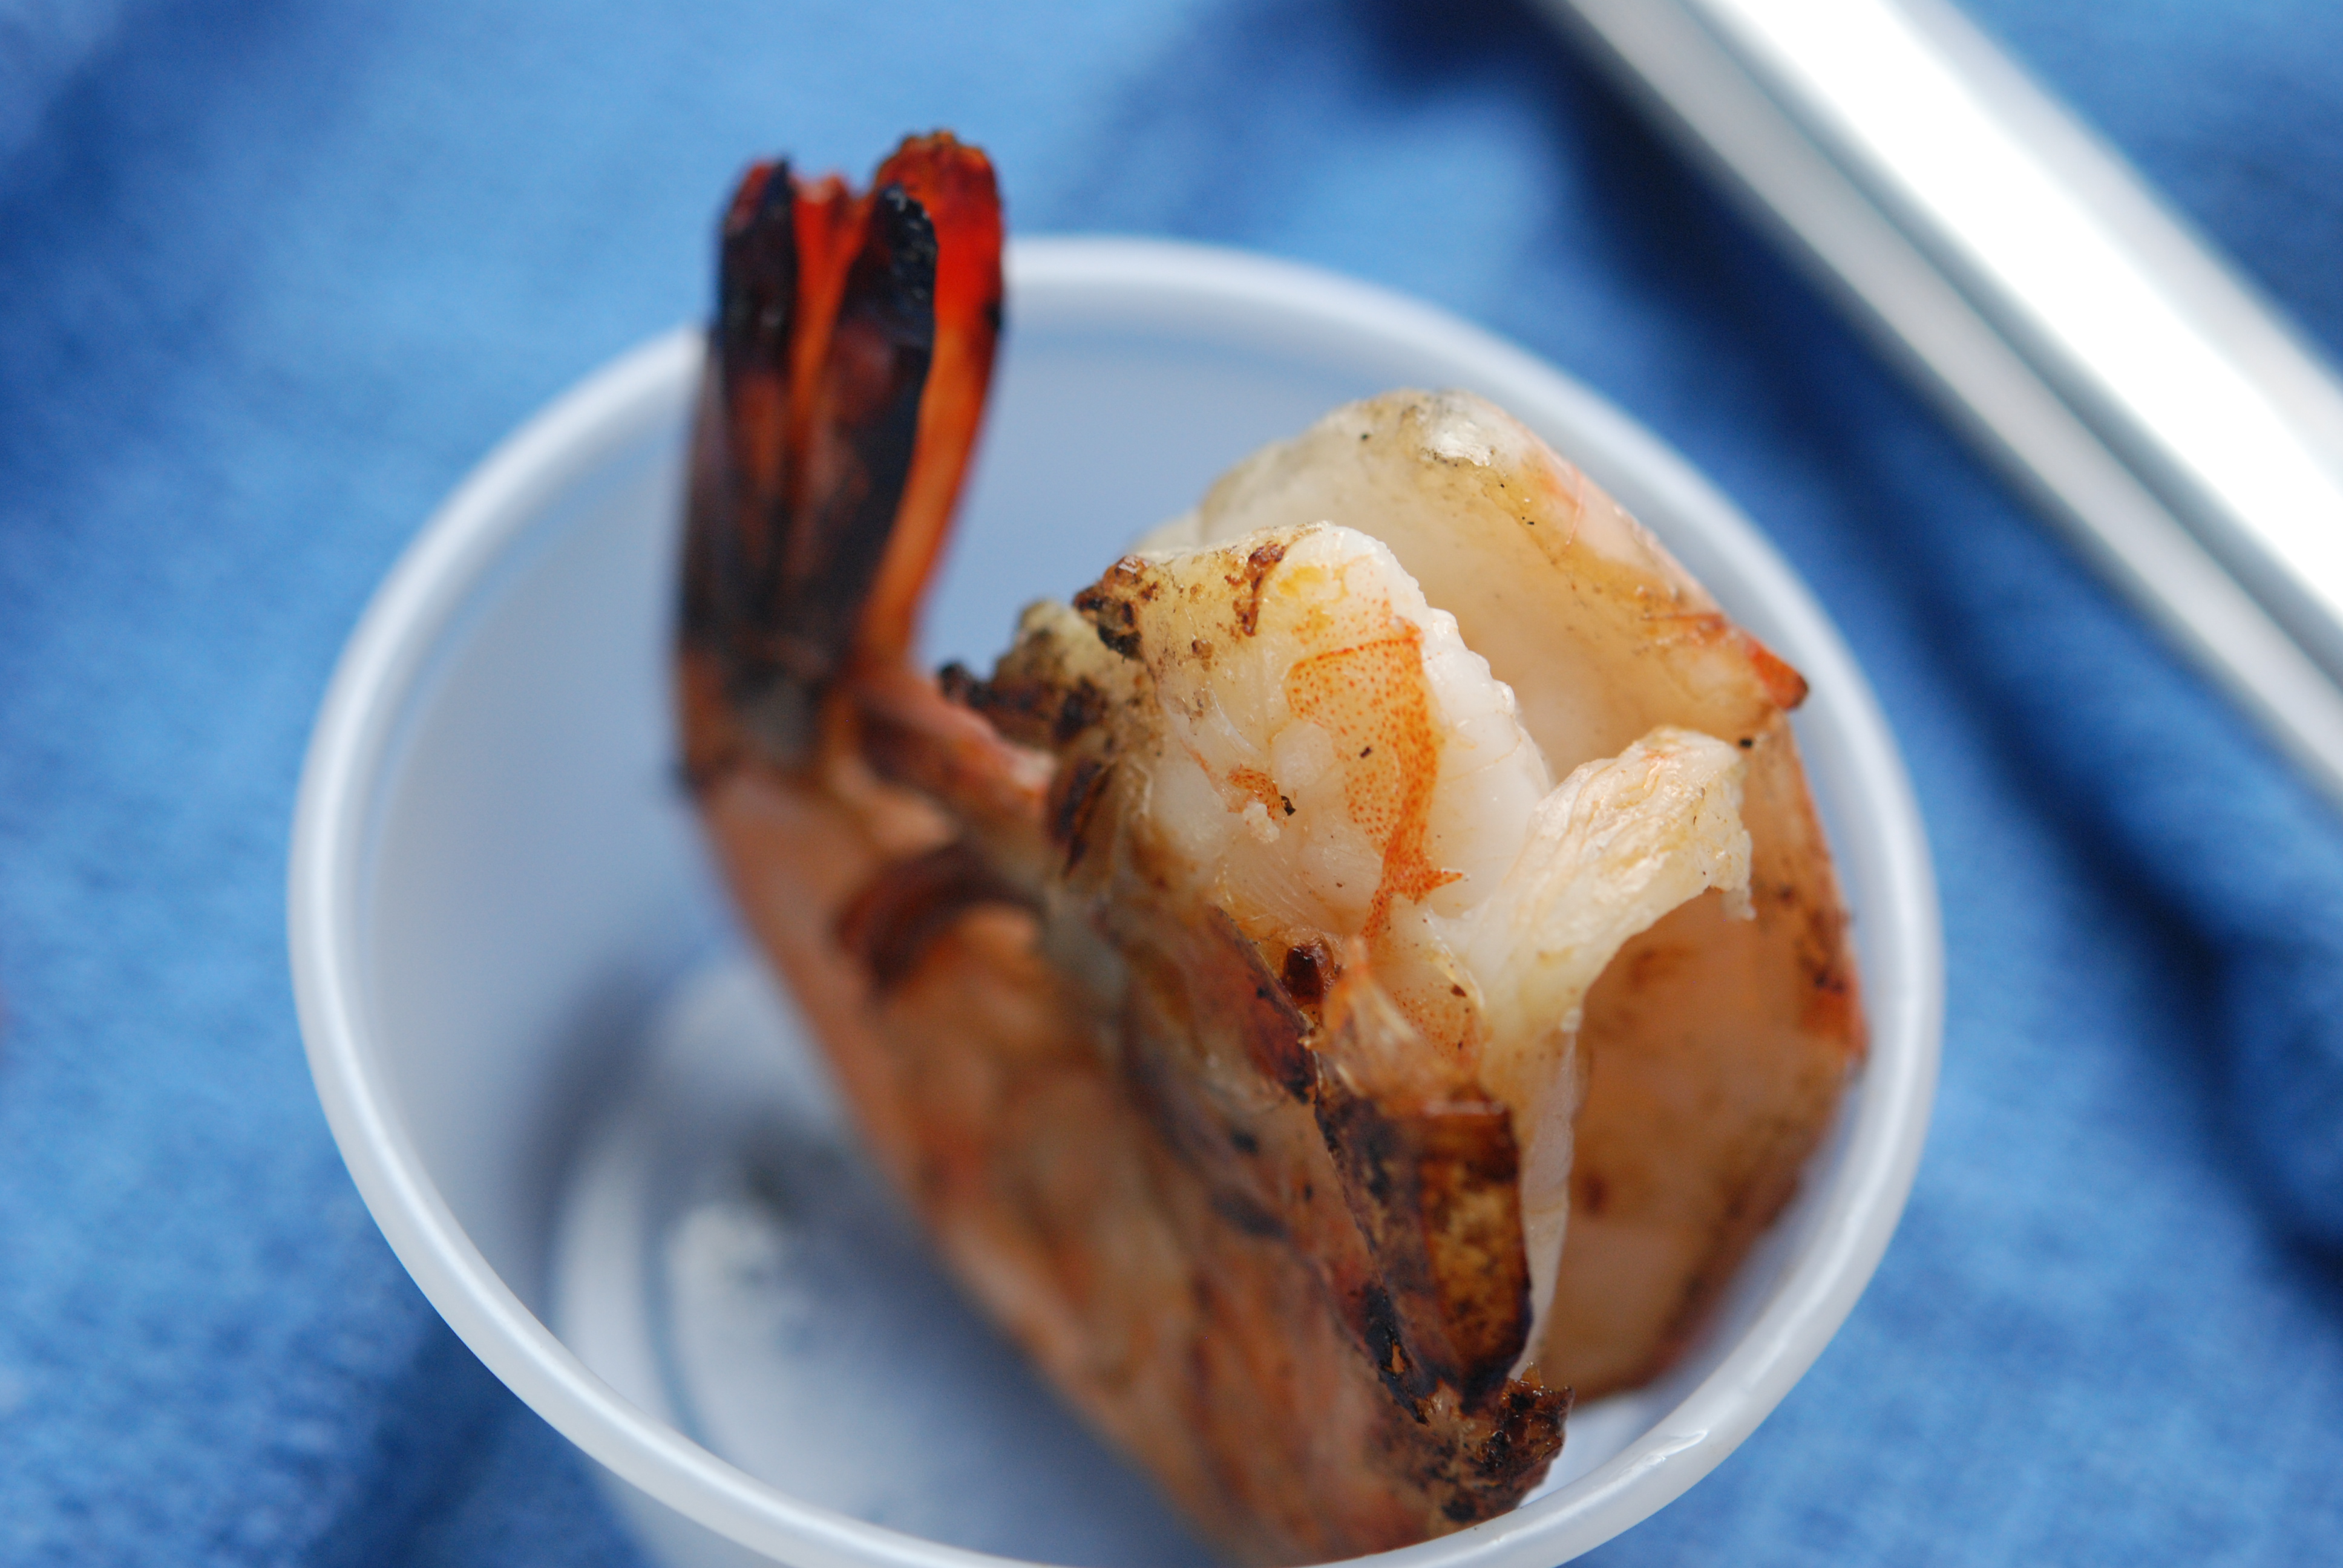 Cooked shrimp in plastic cup on blue cloth.